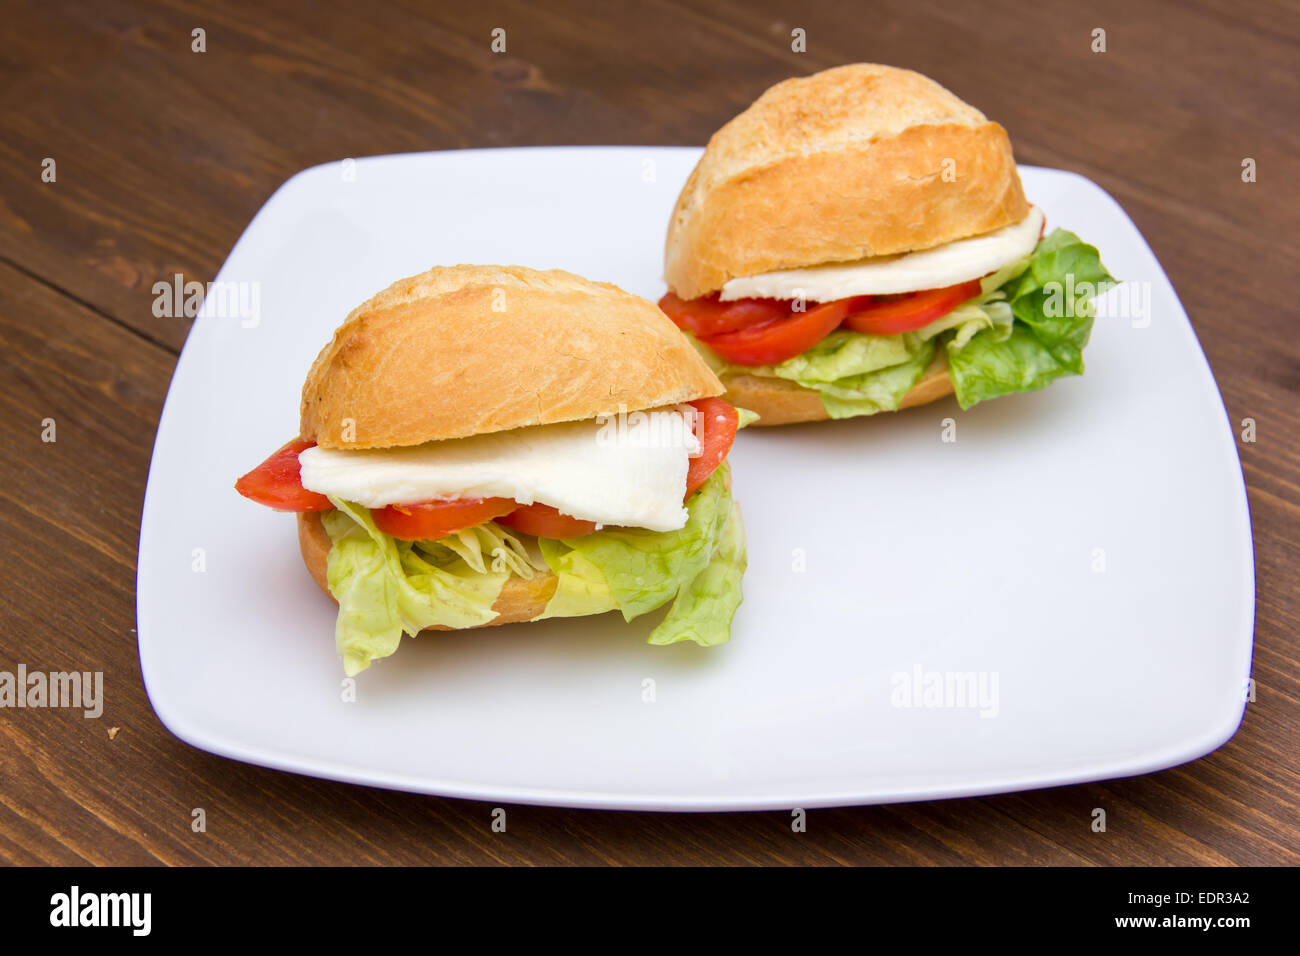 Sandwiches with tomato and cheese on plate over wooden table Stock Photo